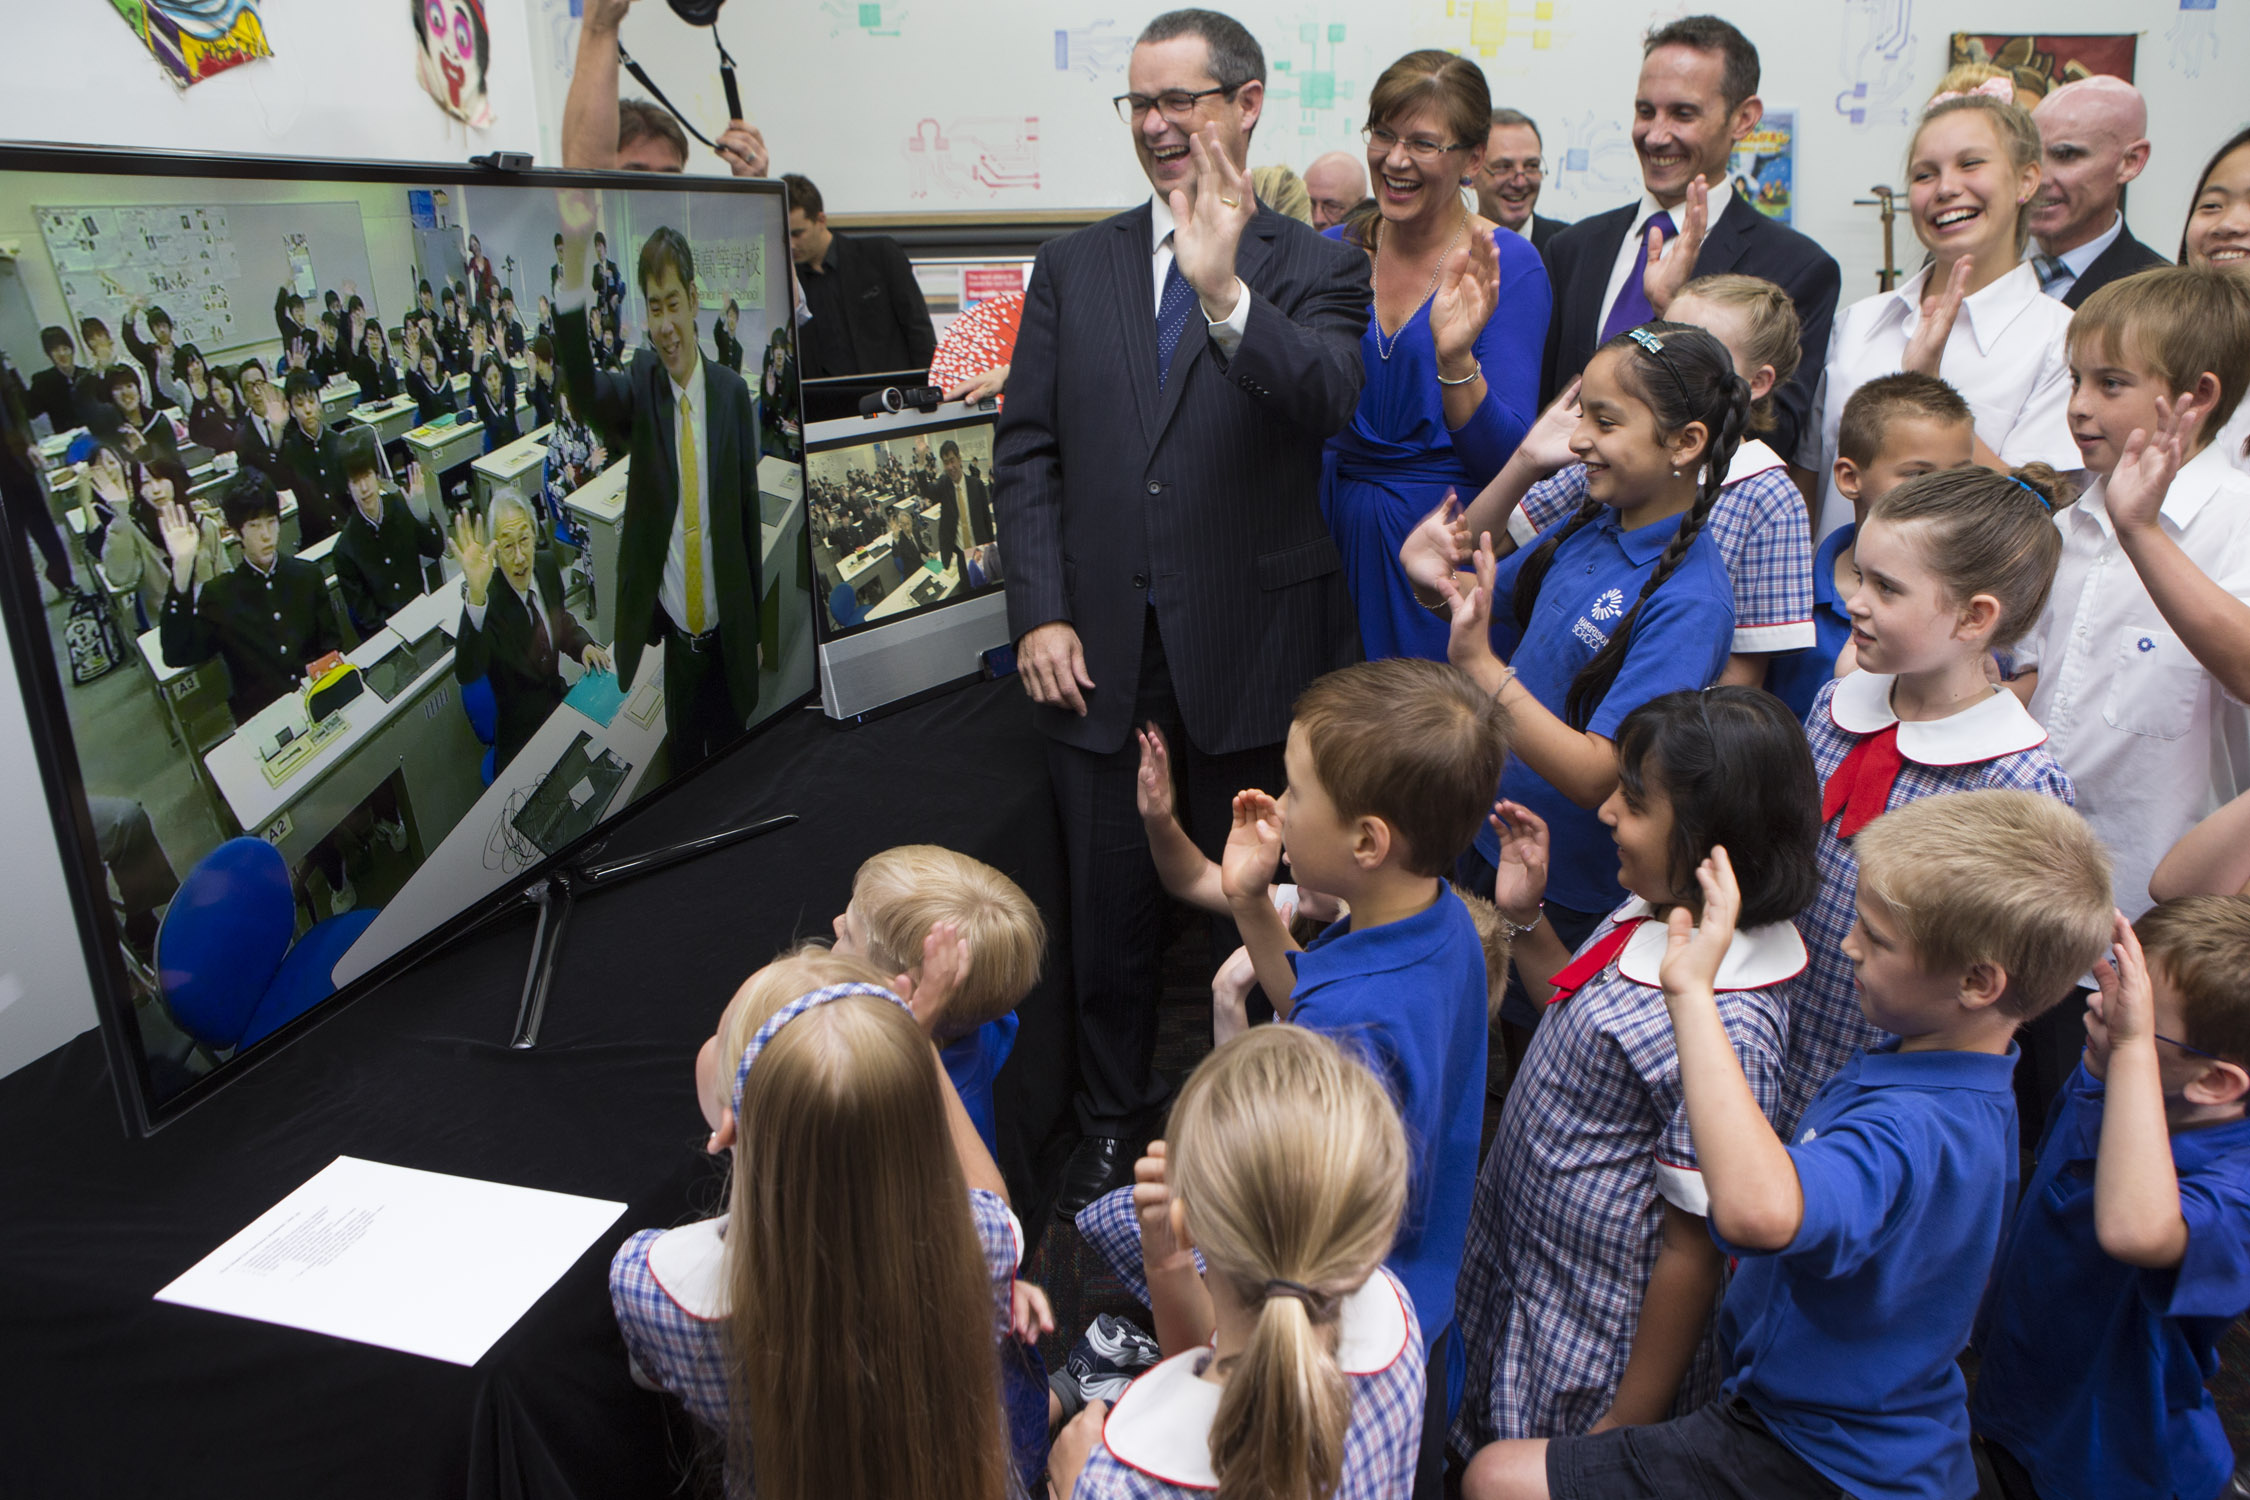 Japanese and Australian schools teleconferencing